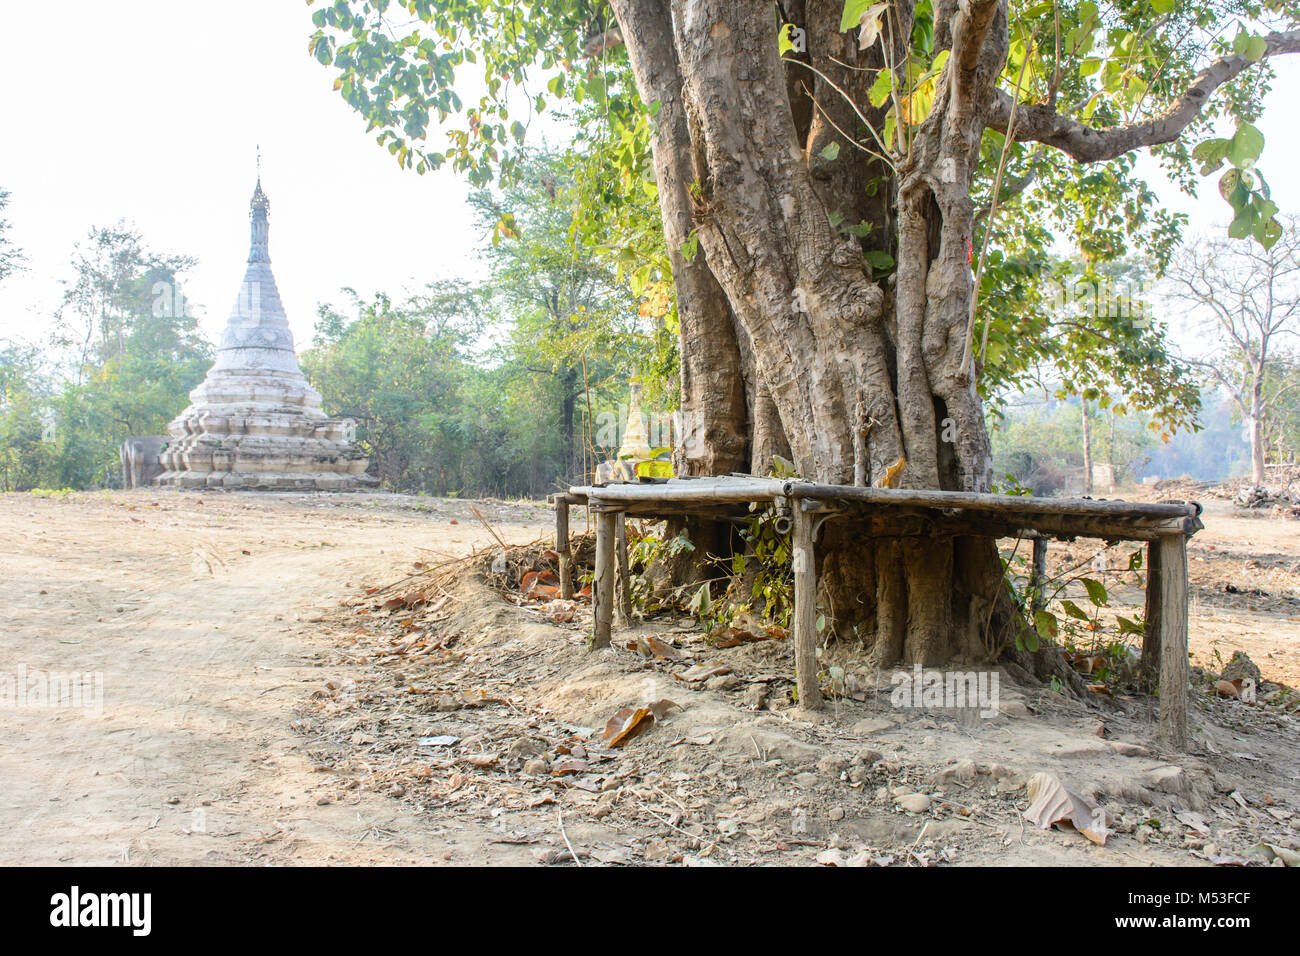 rural view of pagoda, tree and bench Stock Photo